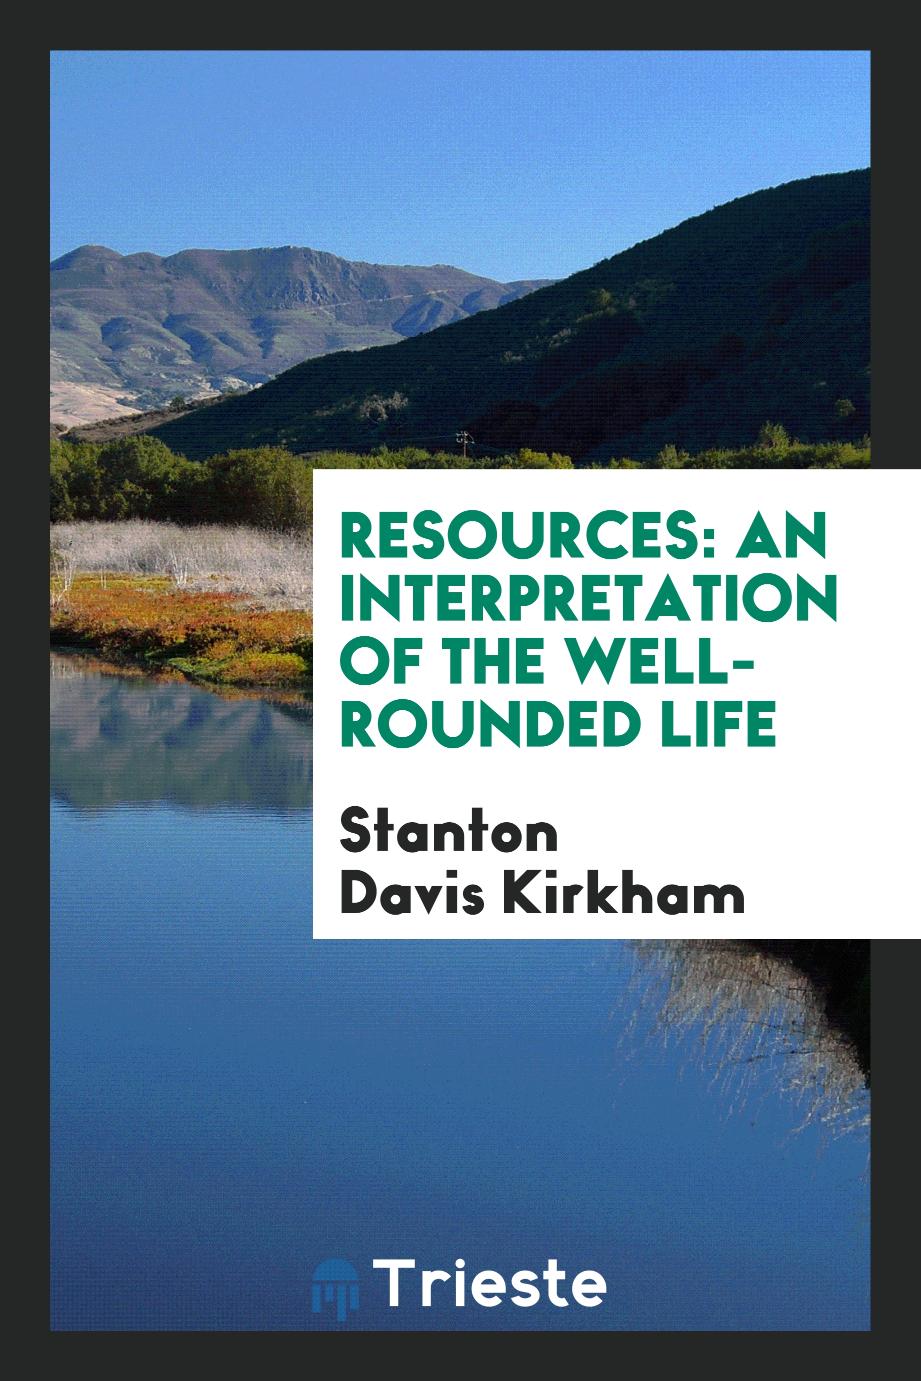 Resources: an interpretation of the well-rounded life